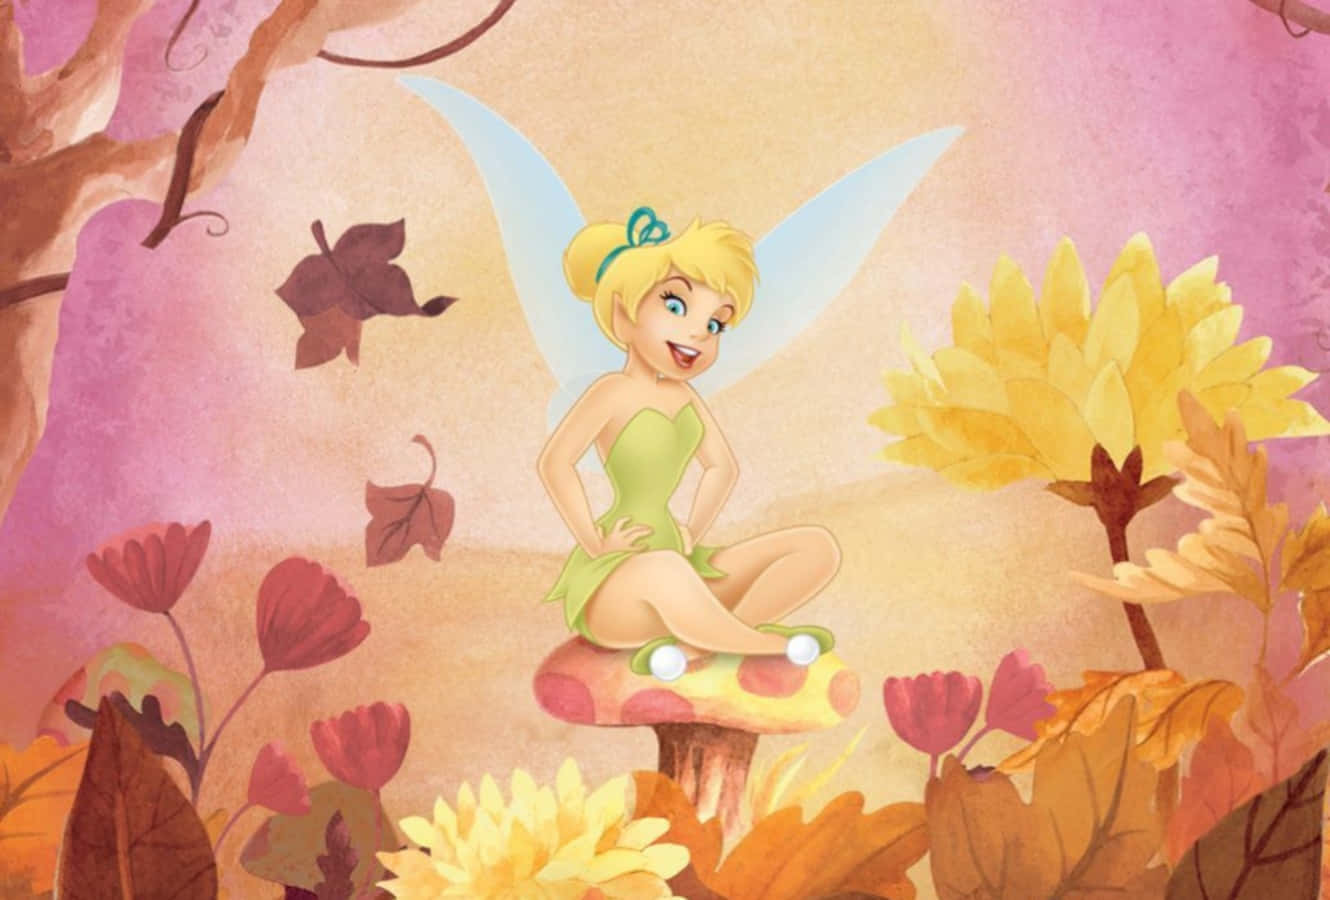 Follow the rainbow and fly with Tinkerbell